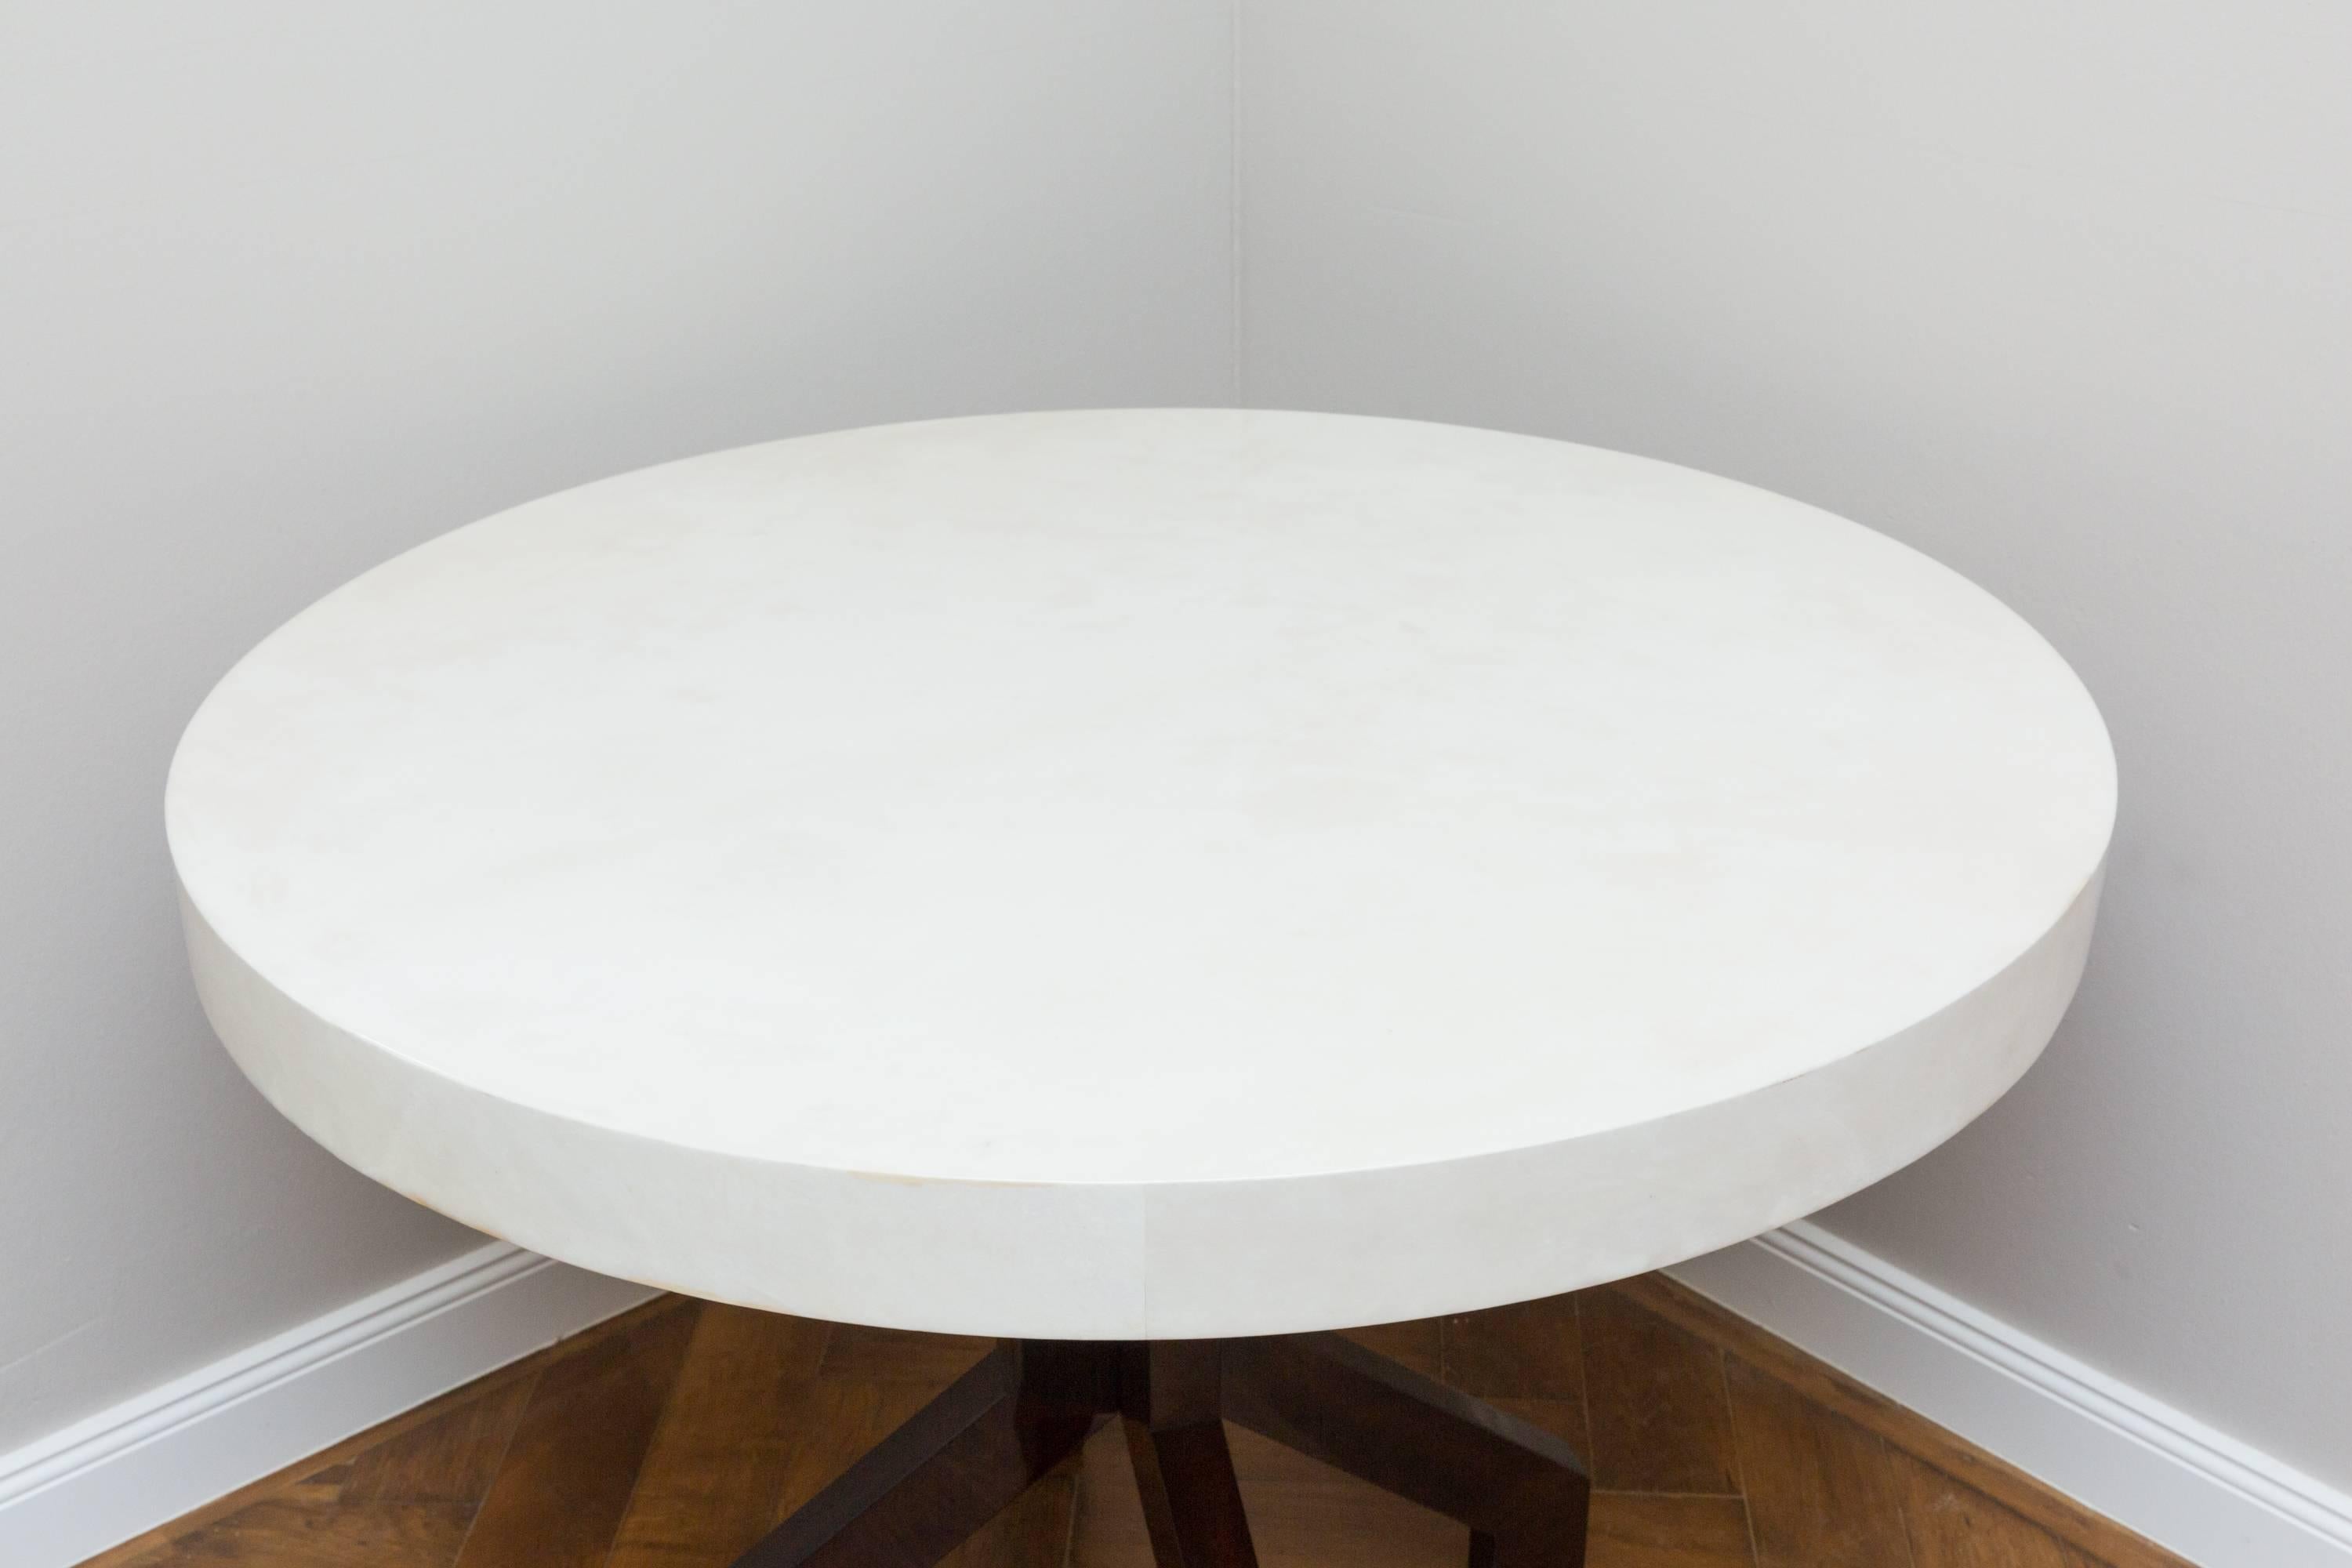 Dining Table by Aldo Tura, Italy, circa 1960 (Lackiert) im Angebot